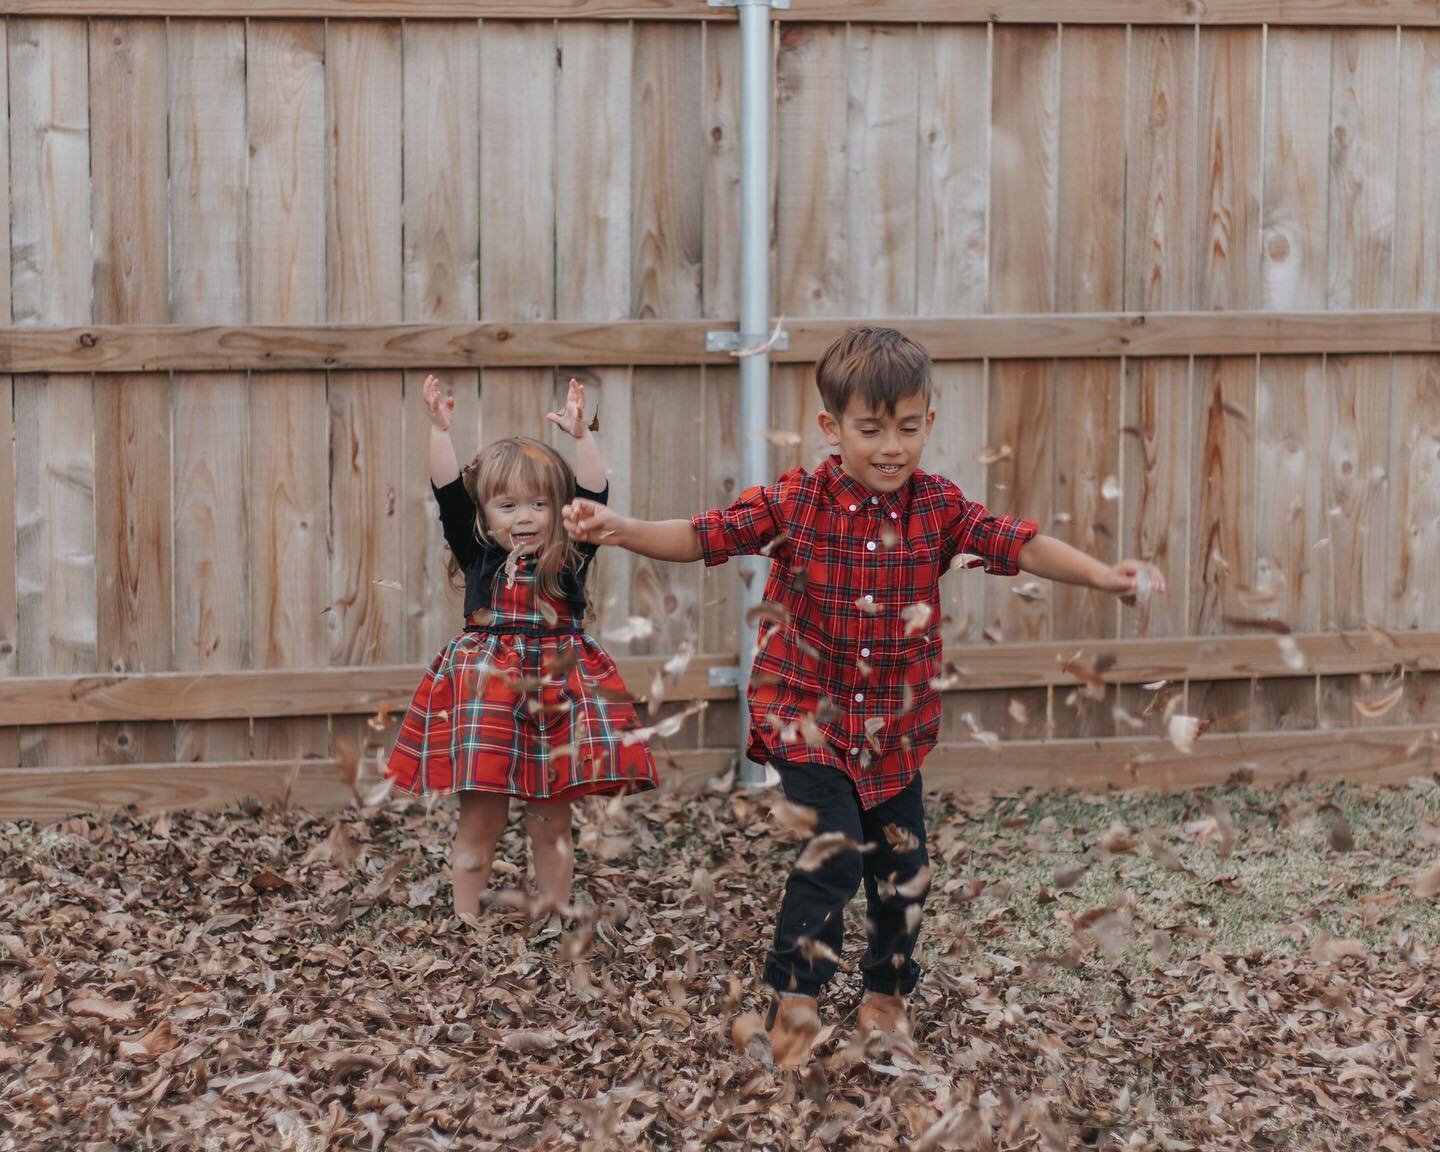 &ldquo;It&rsquo;s snowing!&rdquo; 🍁 🍃 Fun moments in the leaves after an at home family session were to cute not to capture! #candidchildhood
.
.
.
.
Tags.
#lavidaveraphoto #bleachmyfilm #photographyislifee #instadfw #nearsouthsidefortworth #family